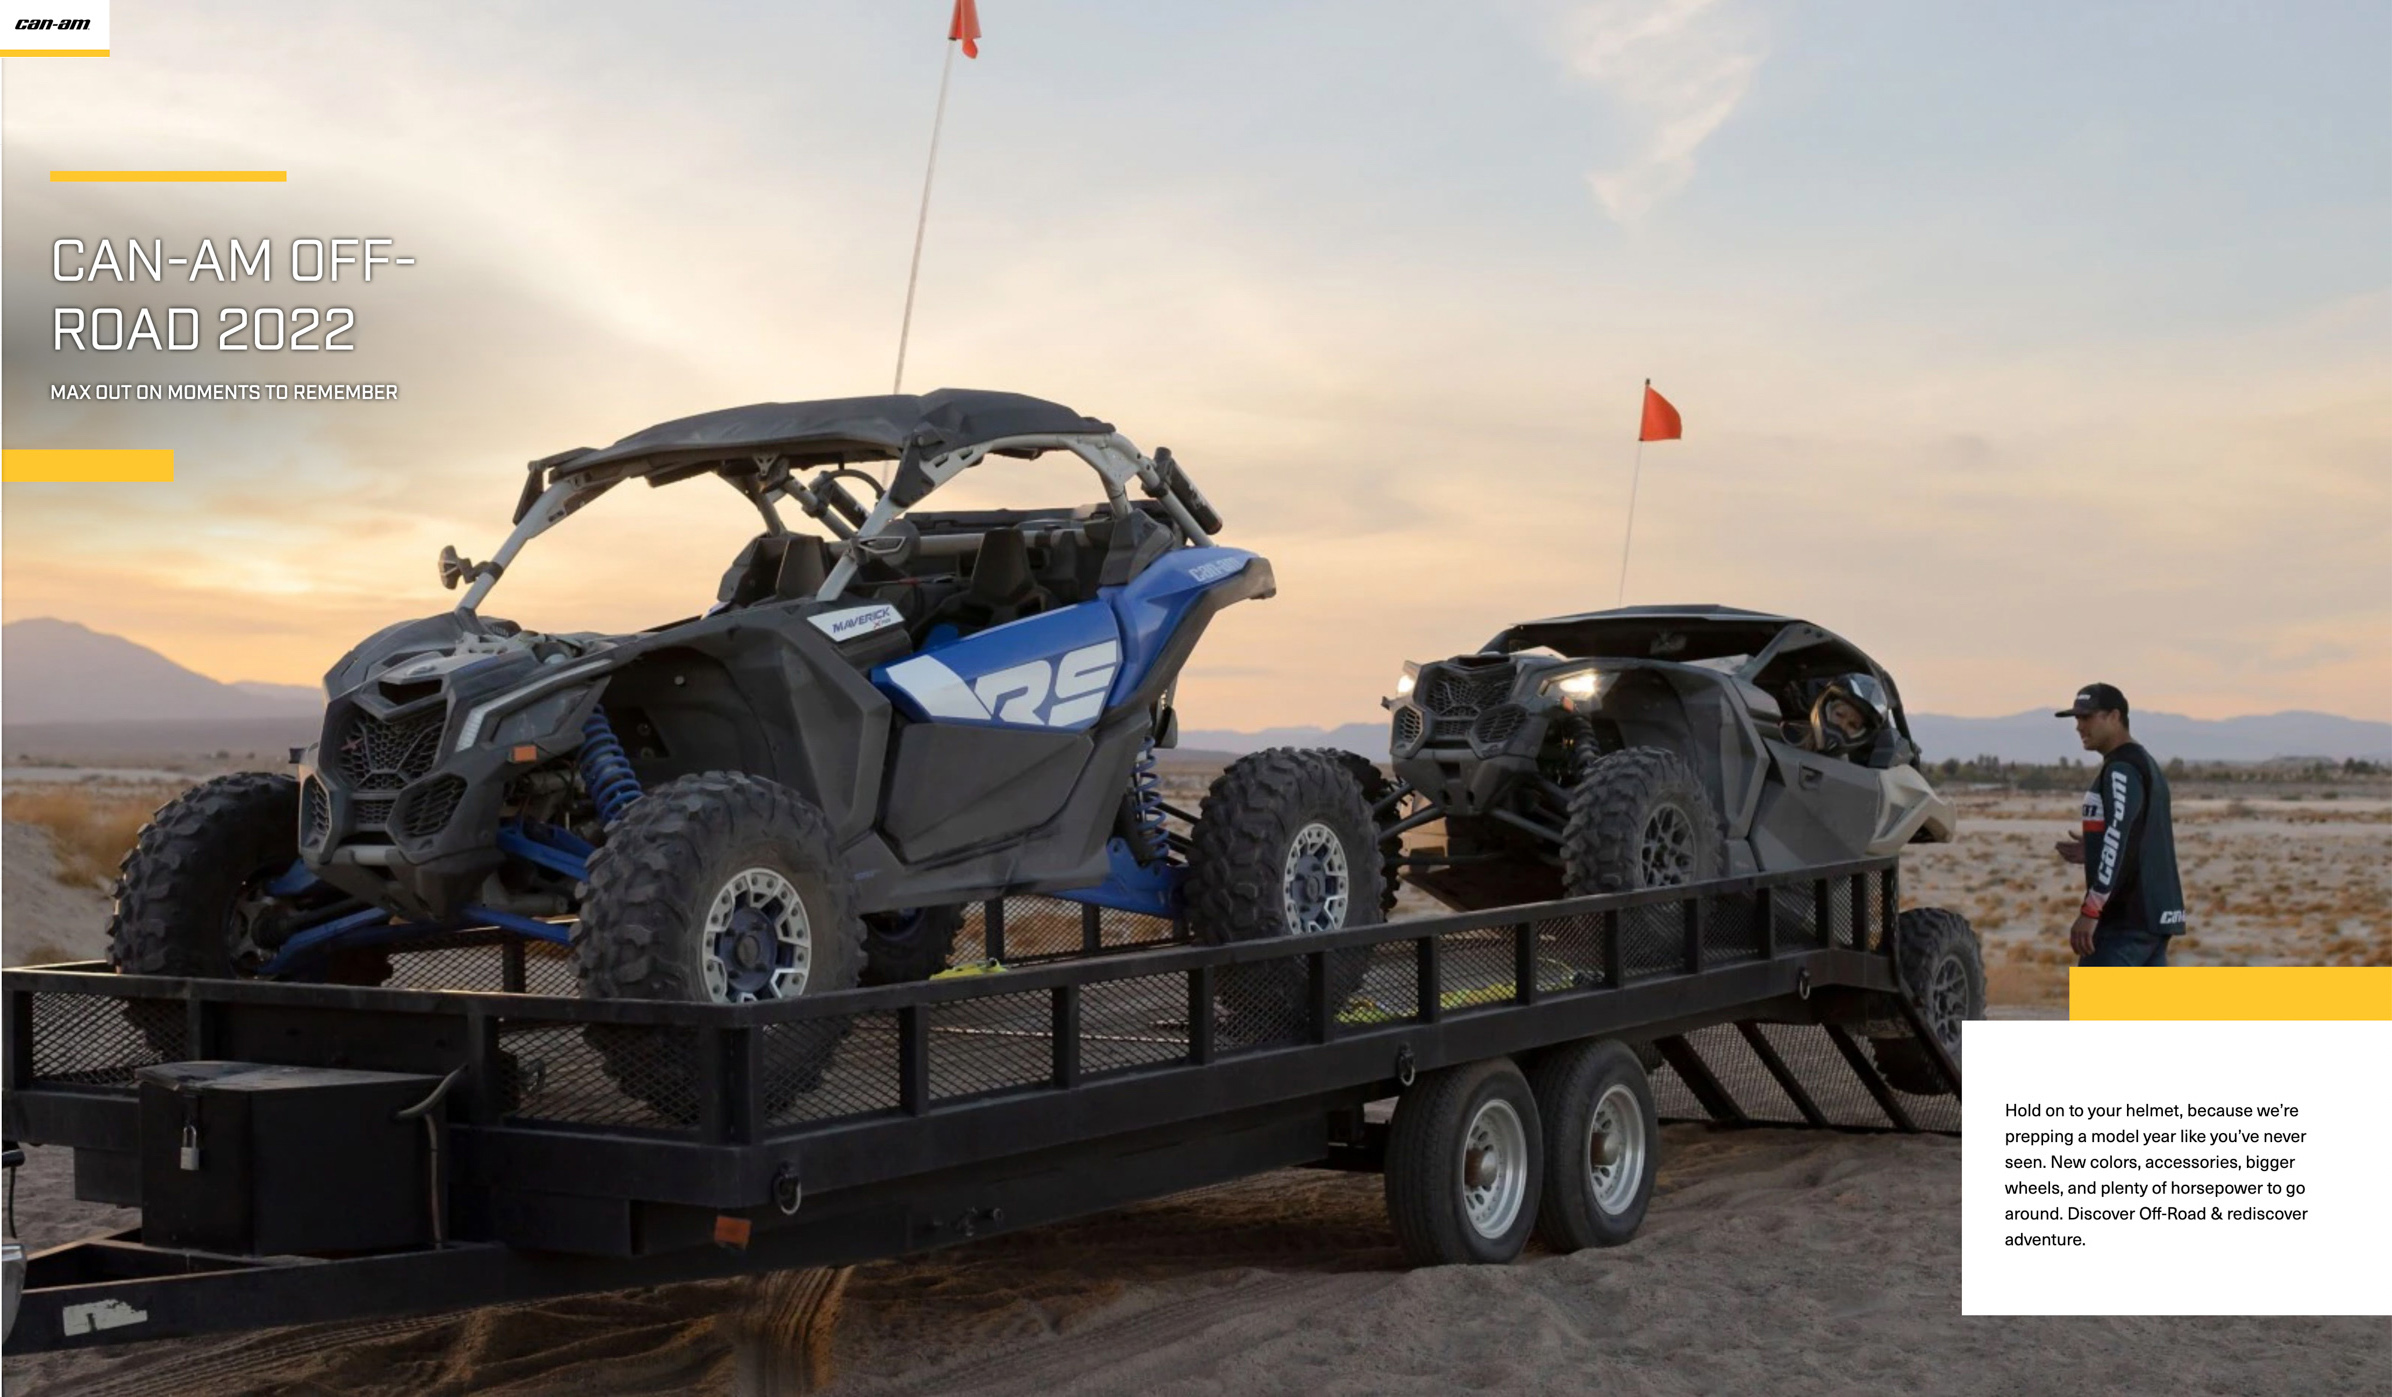 canam-offroad-commercial-photography-desert_0002.JPG